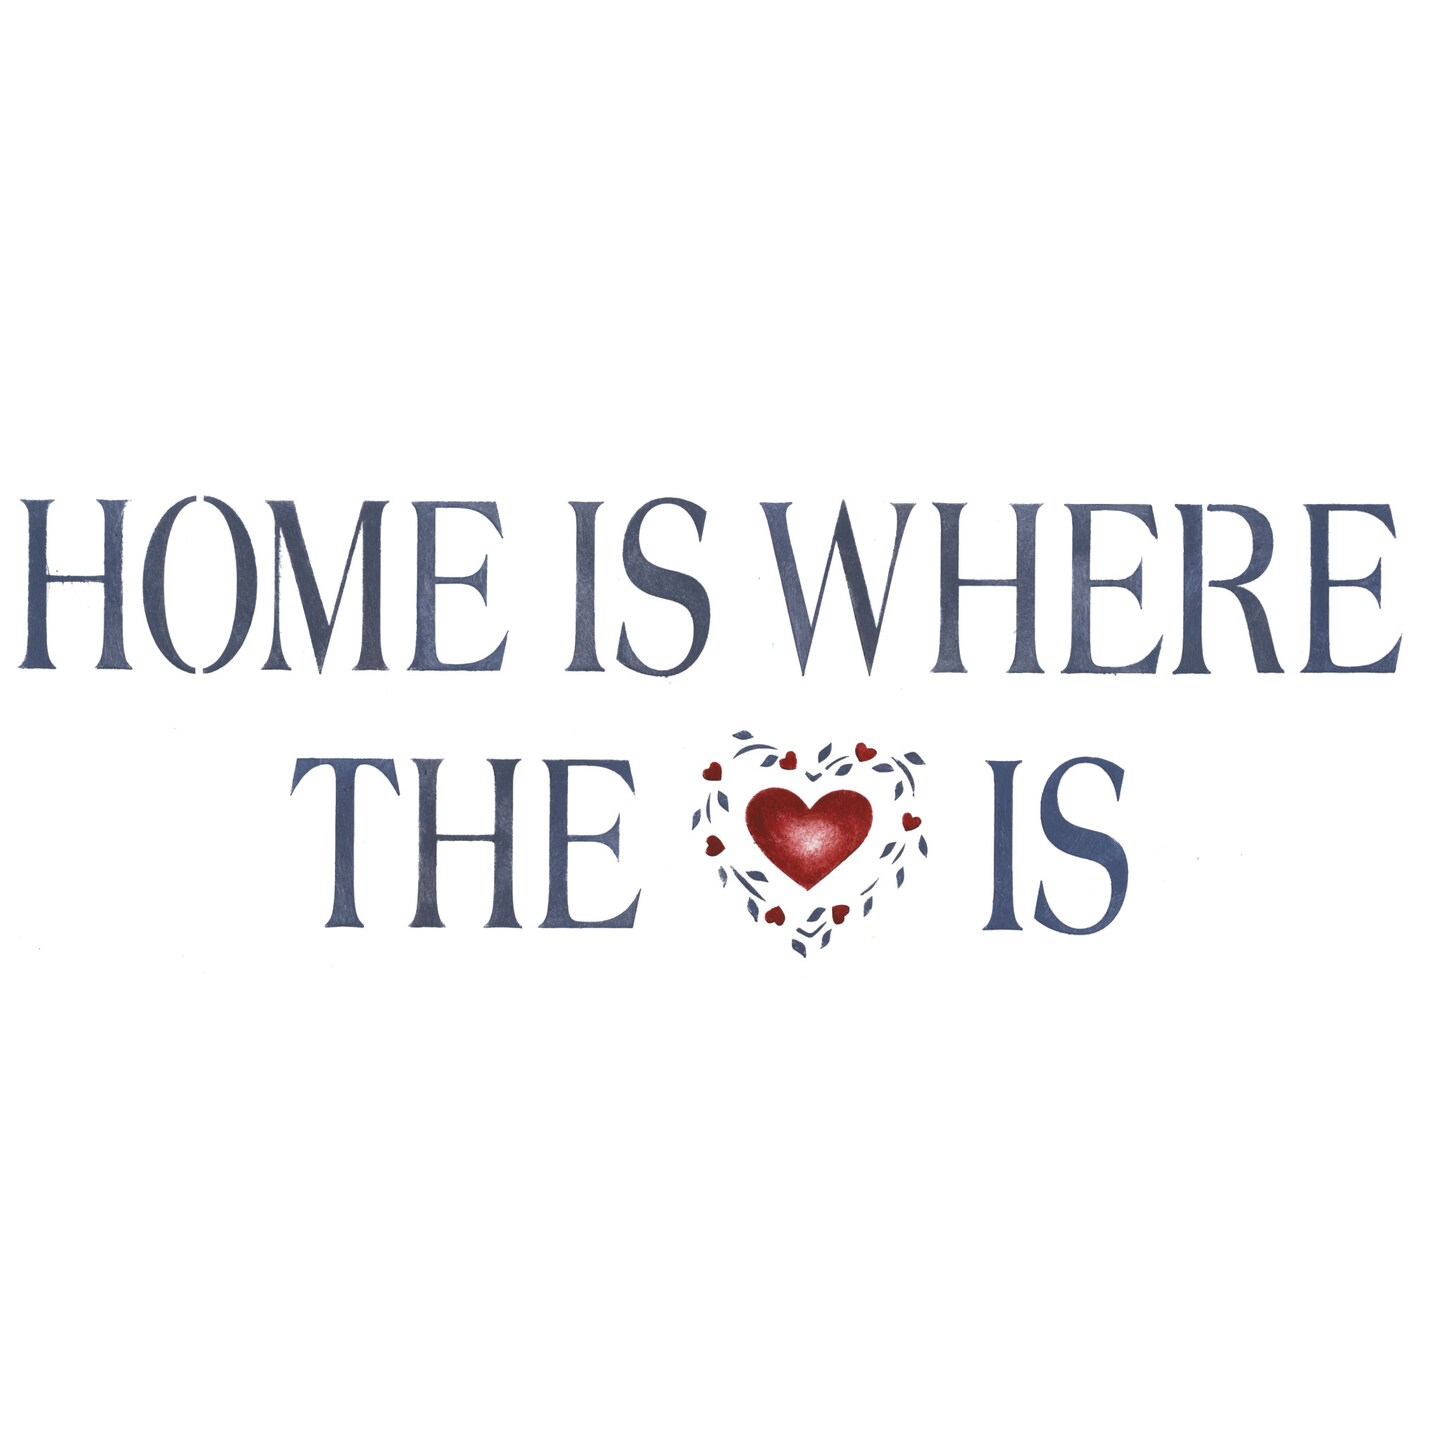 Home is Where The Heart is Lettering Wall Stencil | 3092 by Designer Stencils | Word &#x26; Phrase Stencils | Reusable Art Craft Stencils for Painting on Walls, Canvas, Wood | Reusable Plastic Paint Stencil for Home Makeover | Easy to Use &#x26; Clean